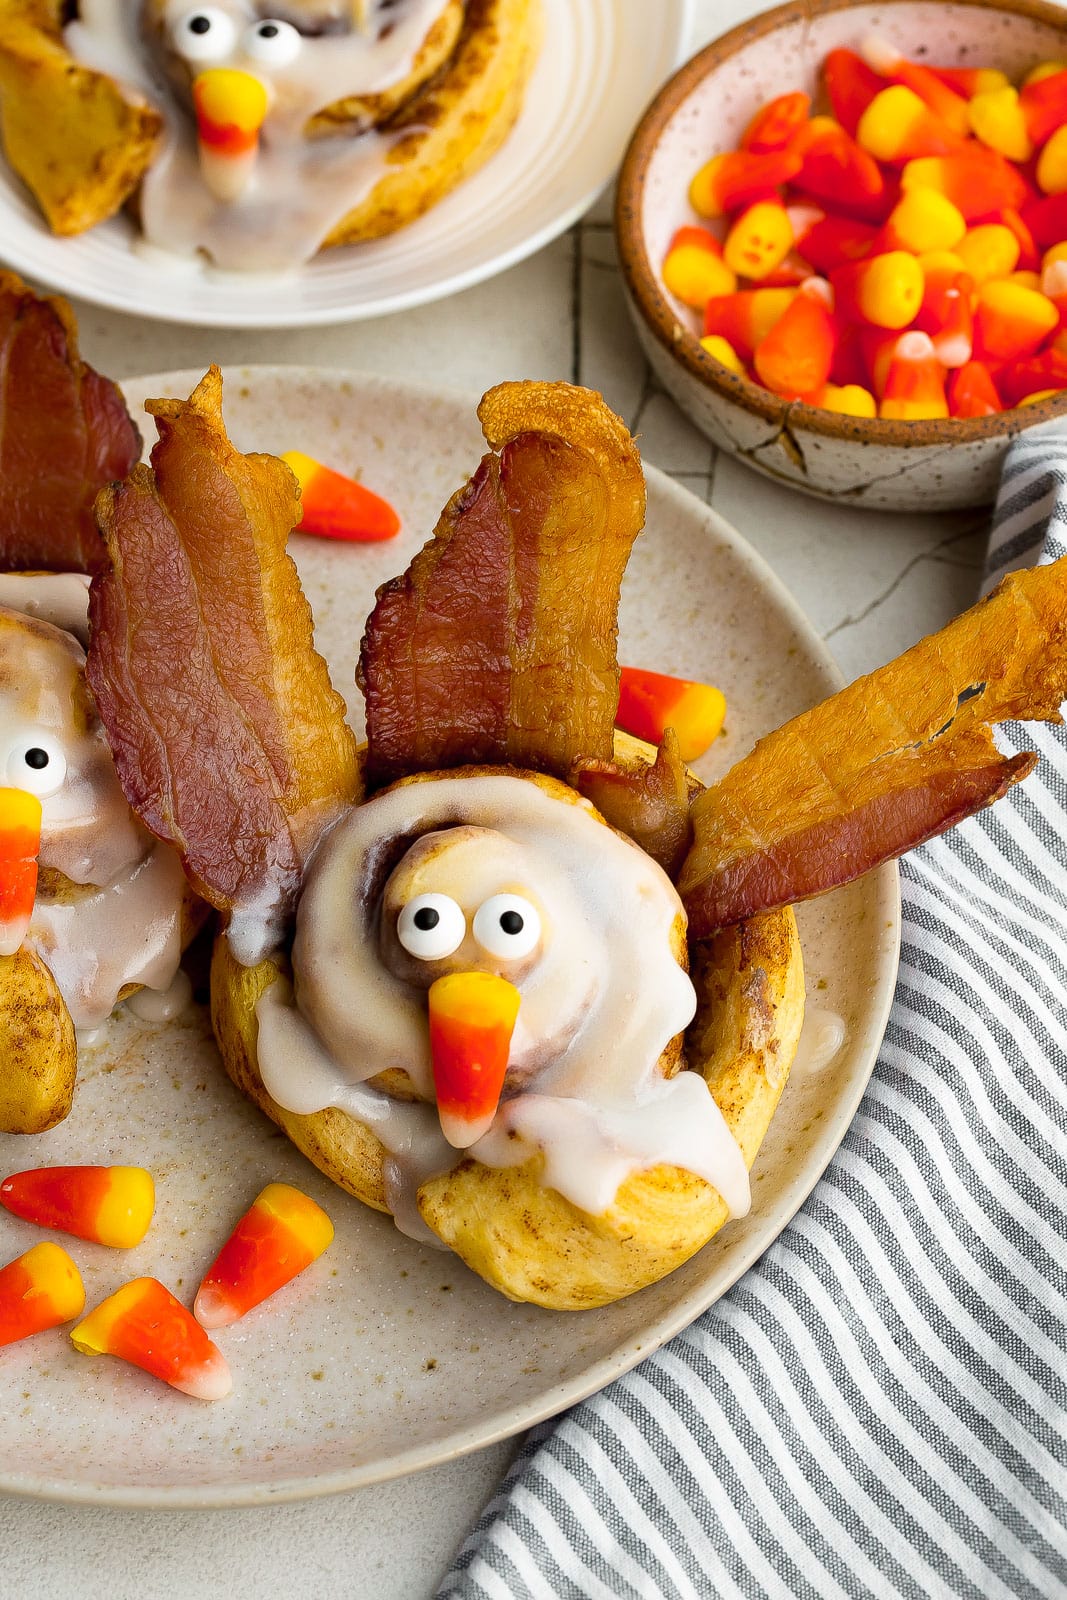 Plate with cinnamon rolls, bacon, candy corn, and edible eyes.